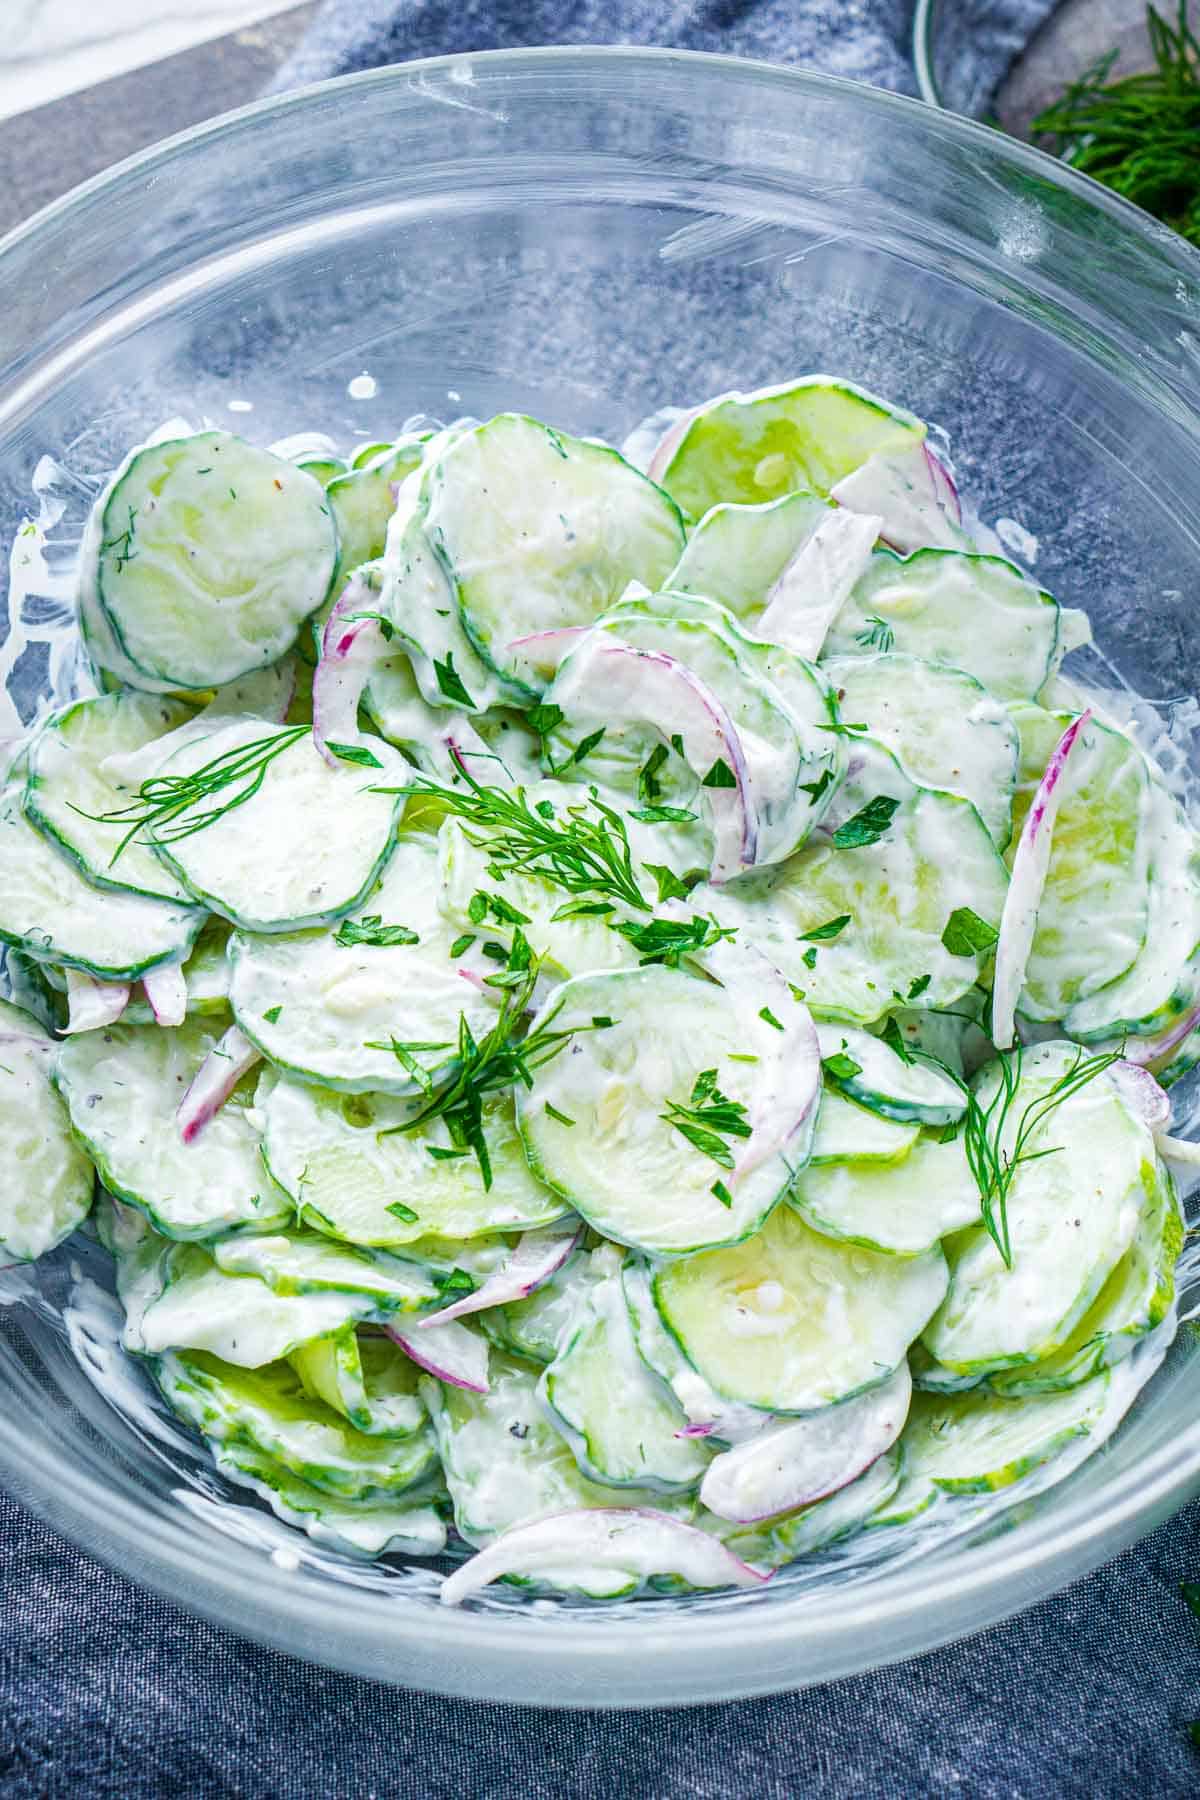 creamy cucumber salad with serving spoon in glass bowl on blue linen